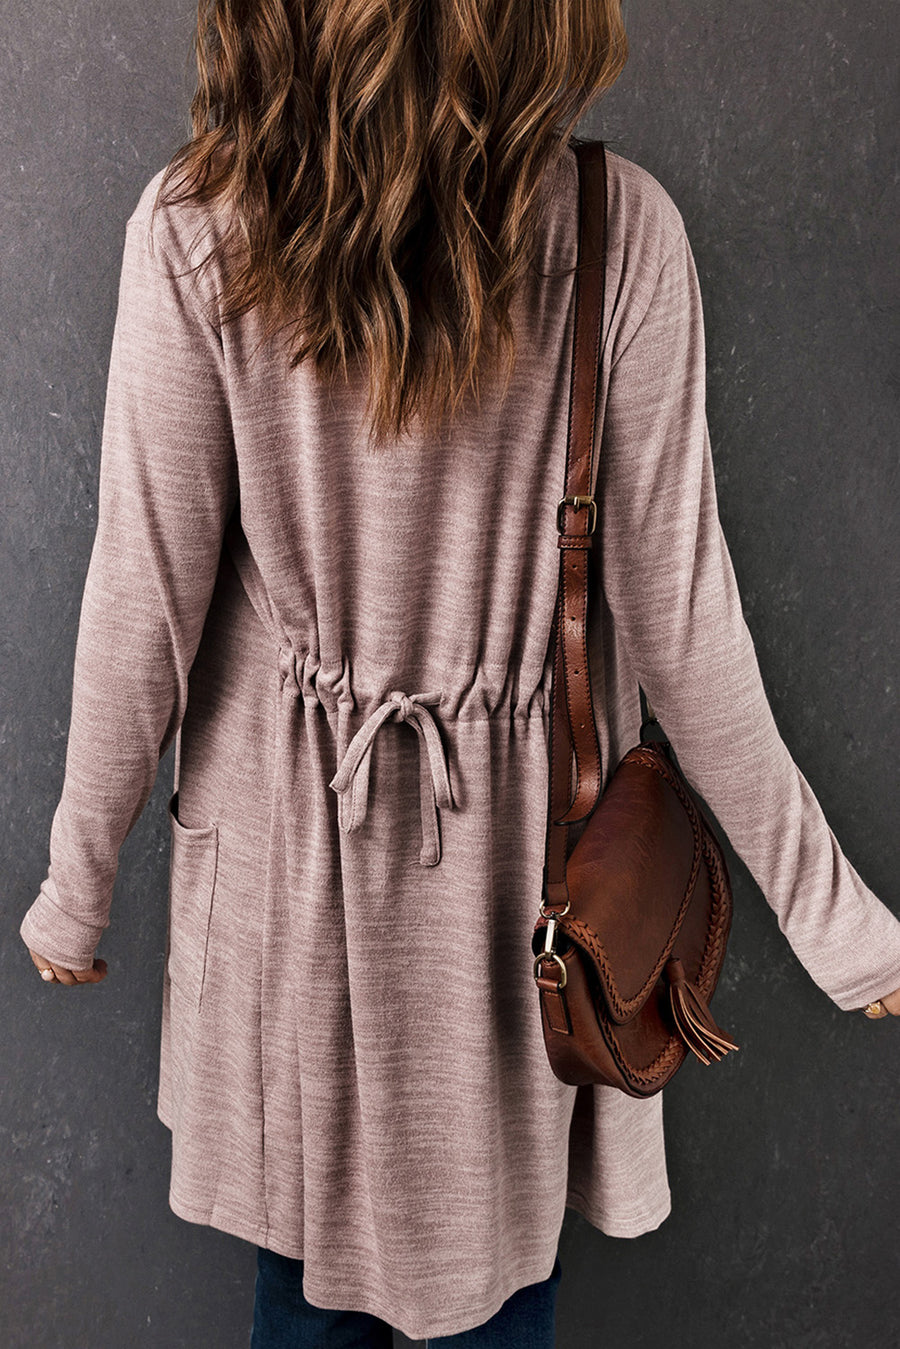 Meet Me In The Back Cardigan in Dusty Pink